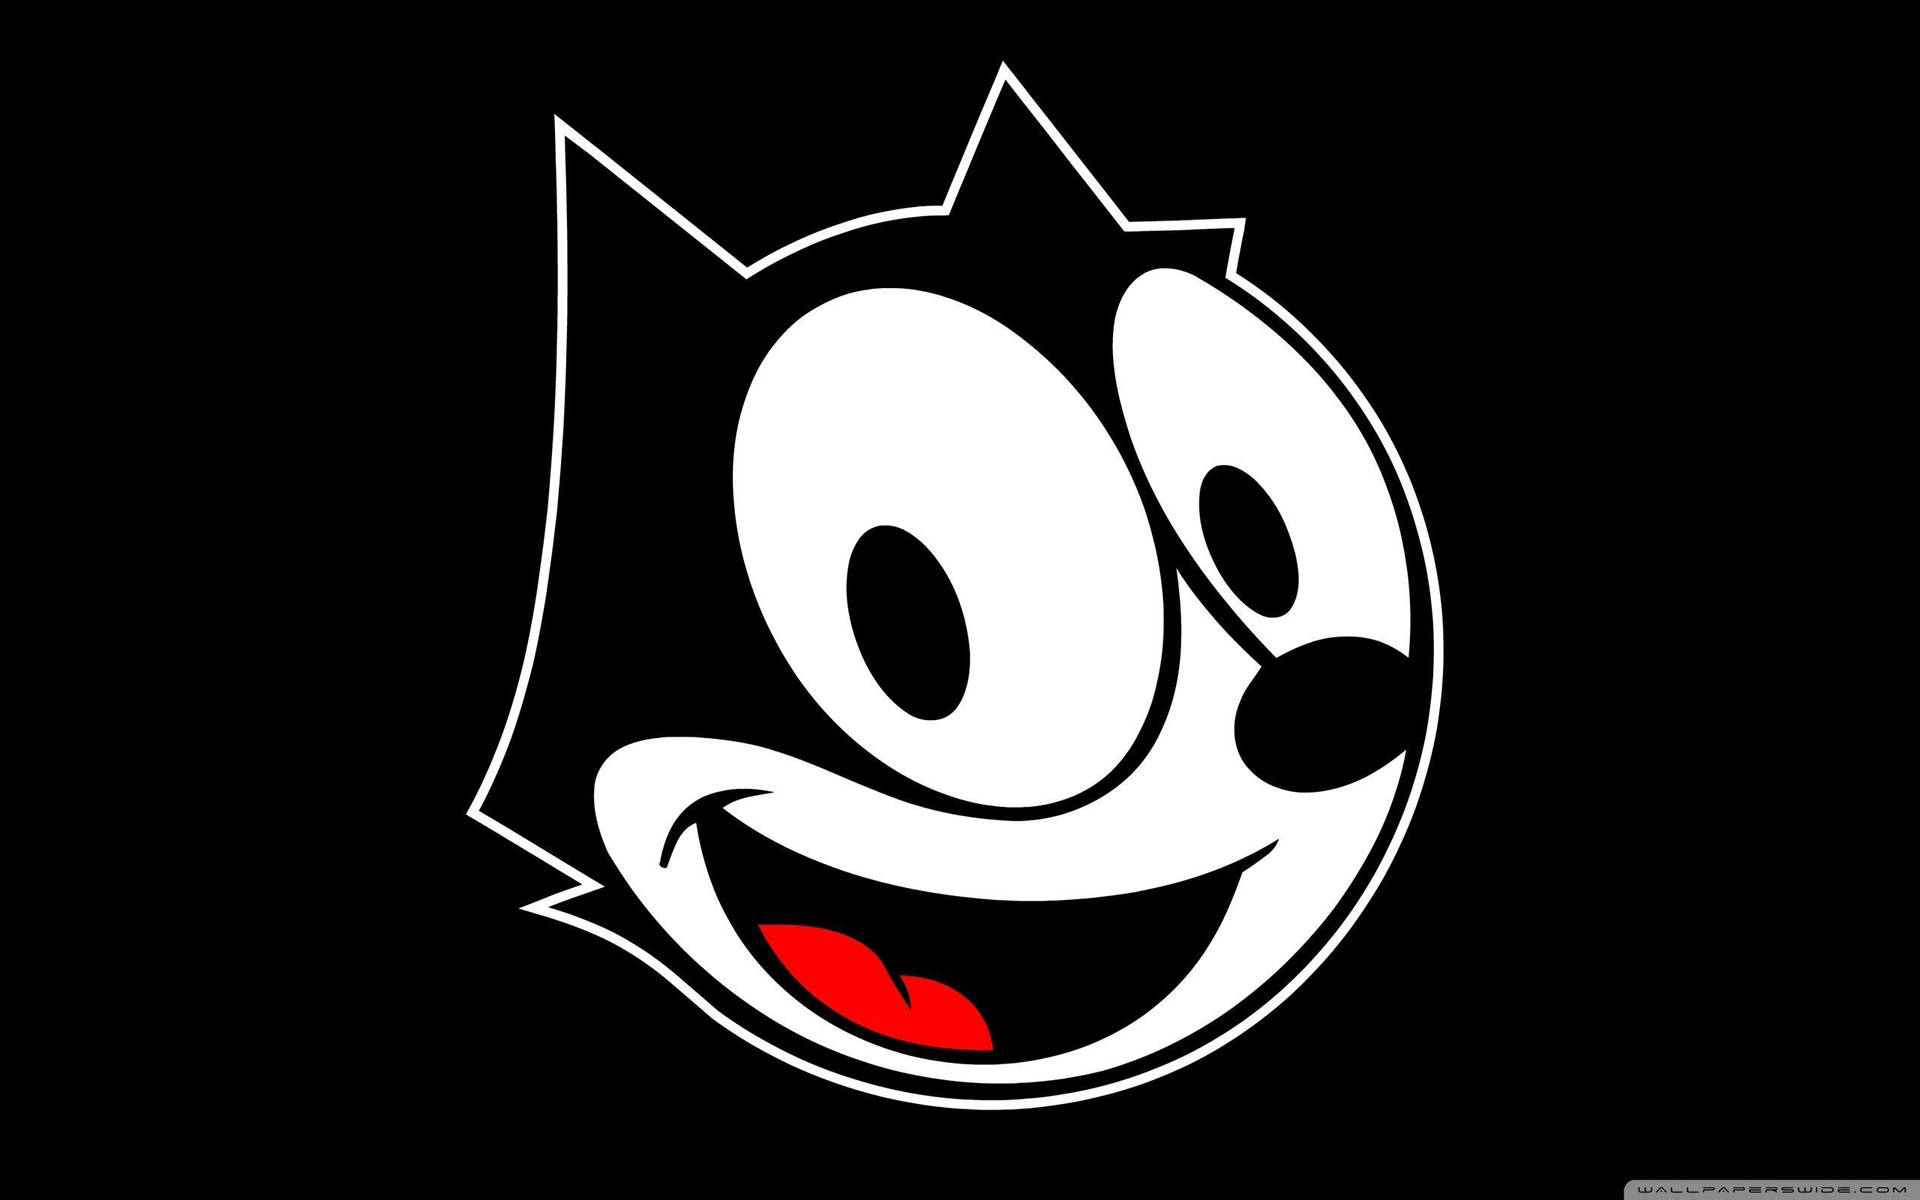 Top 999+ Felix The Cat Wallpapers Full HD, 4K✅Free to Use